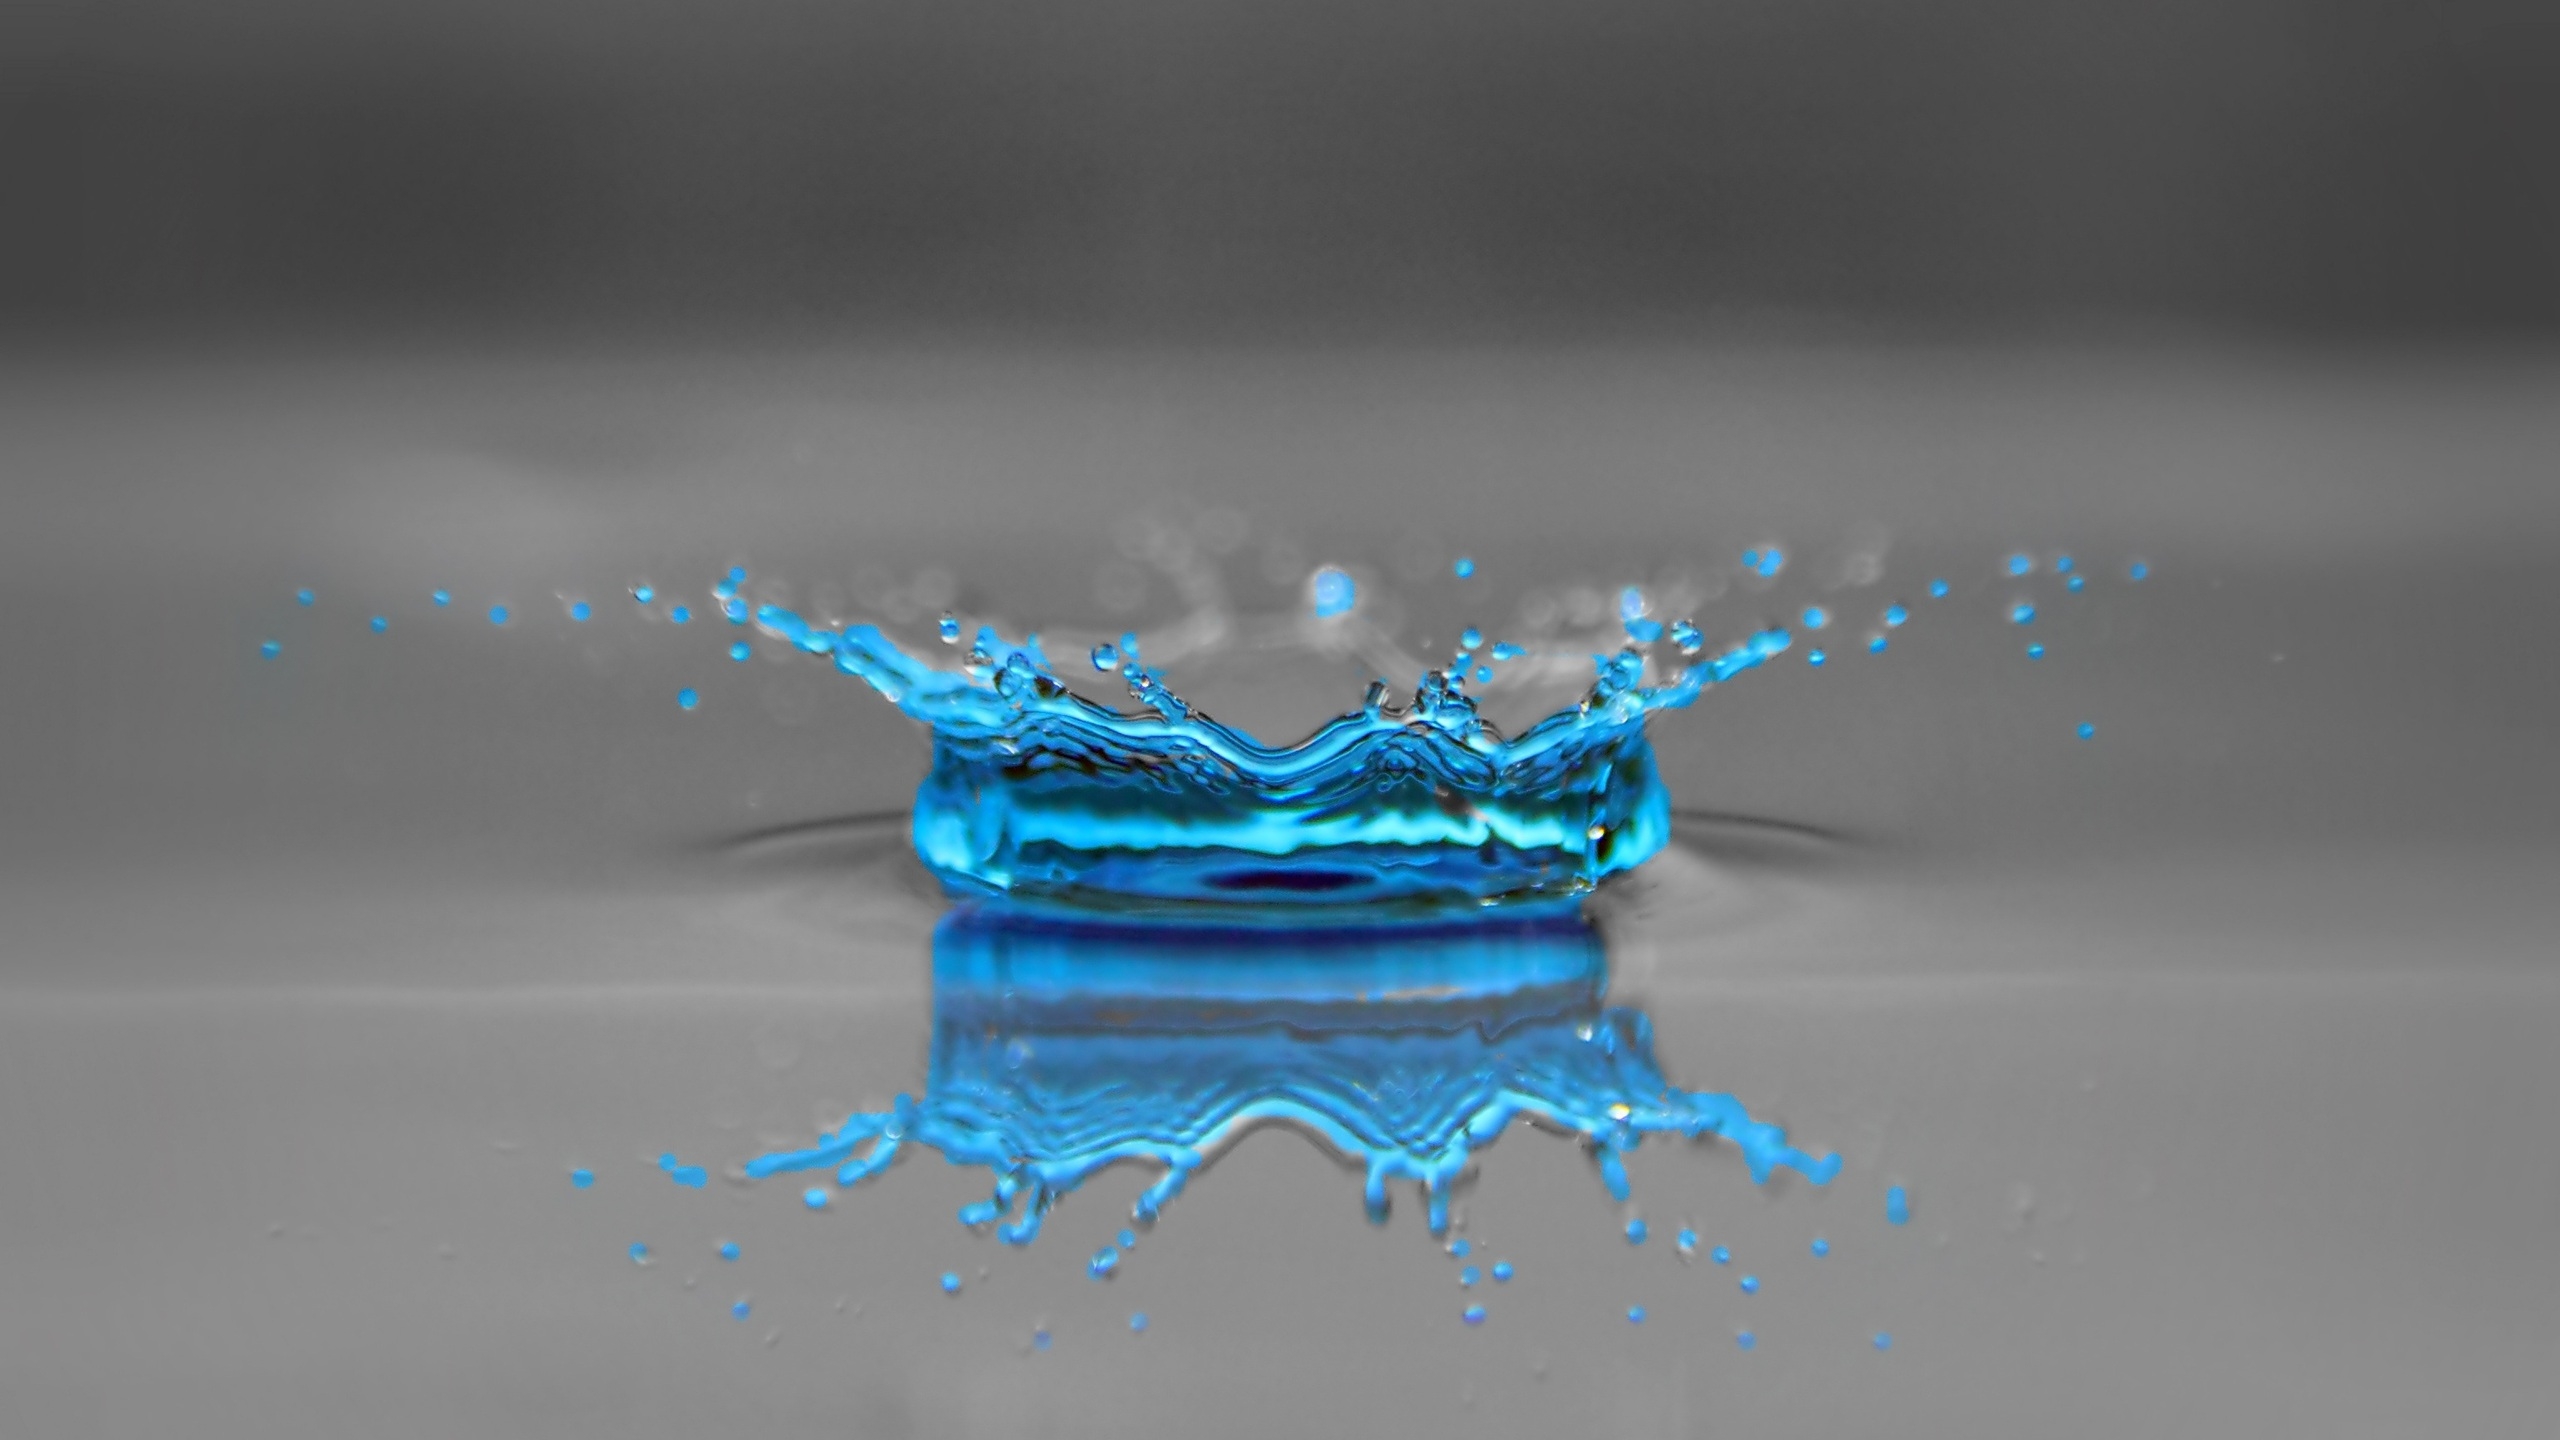 Blue Drop of Water for 2560x1440 HDTV resolution